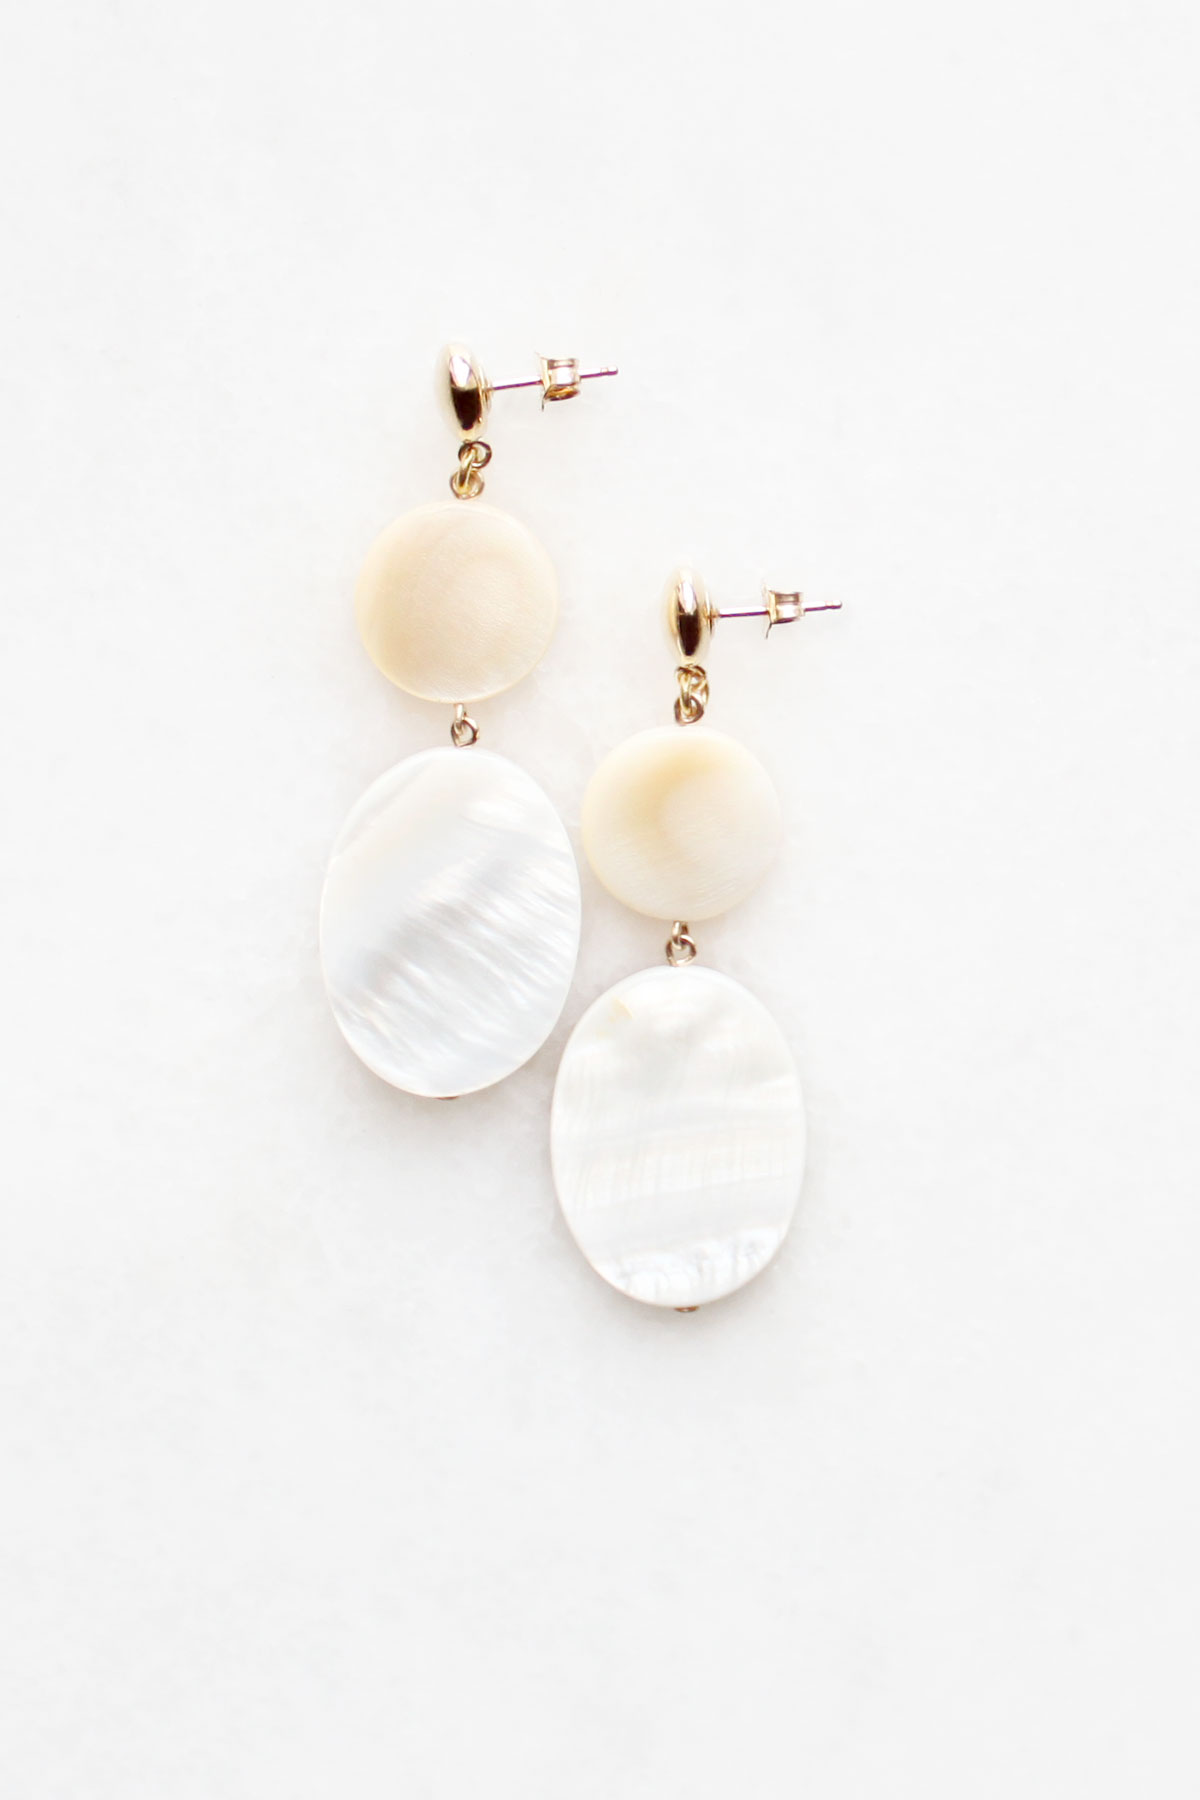 Mother of Pearl Earrings by The Vamoose